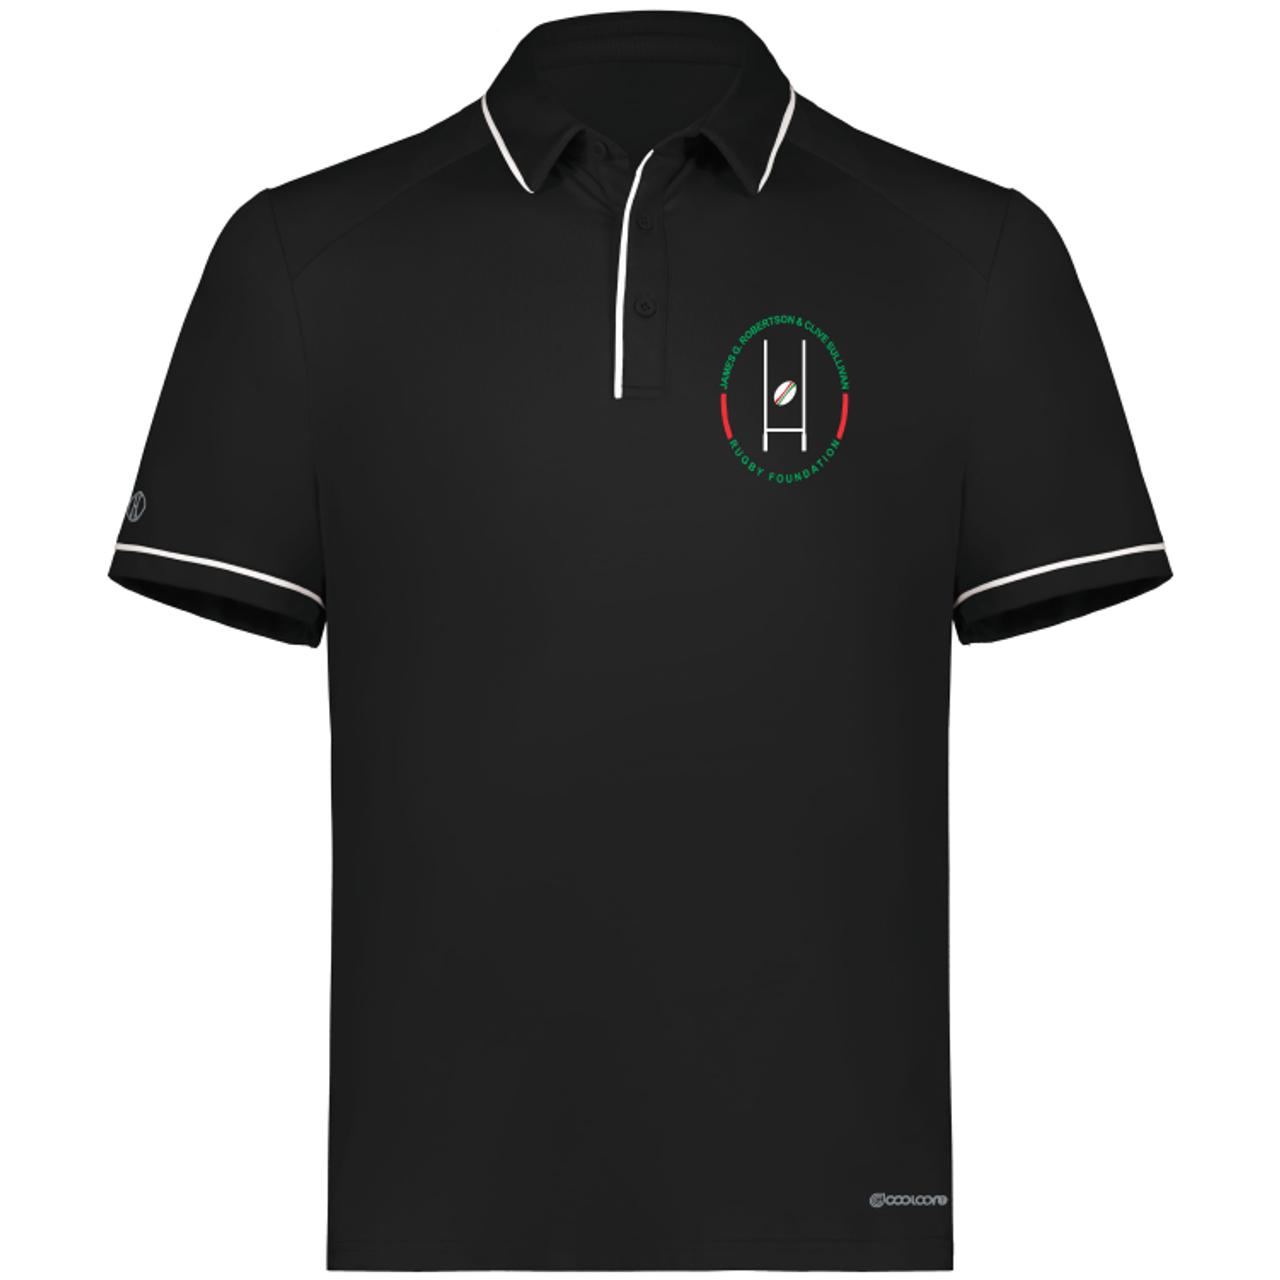 HBCU Rugby Performance Polo